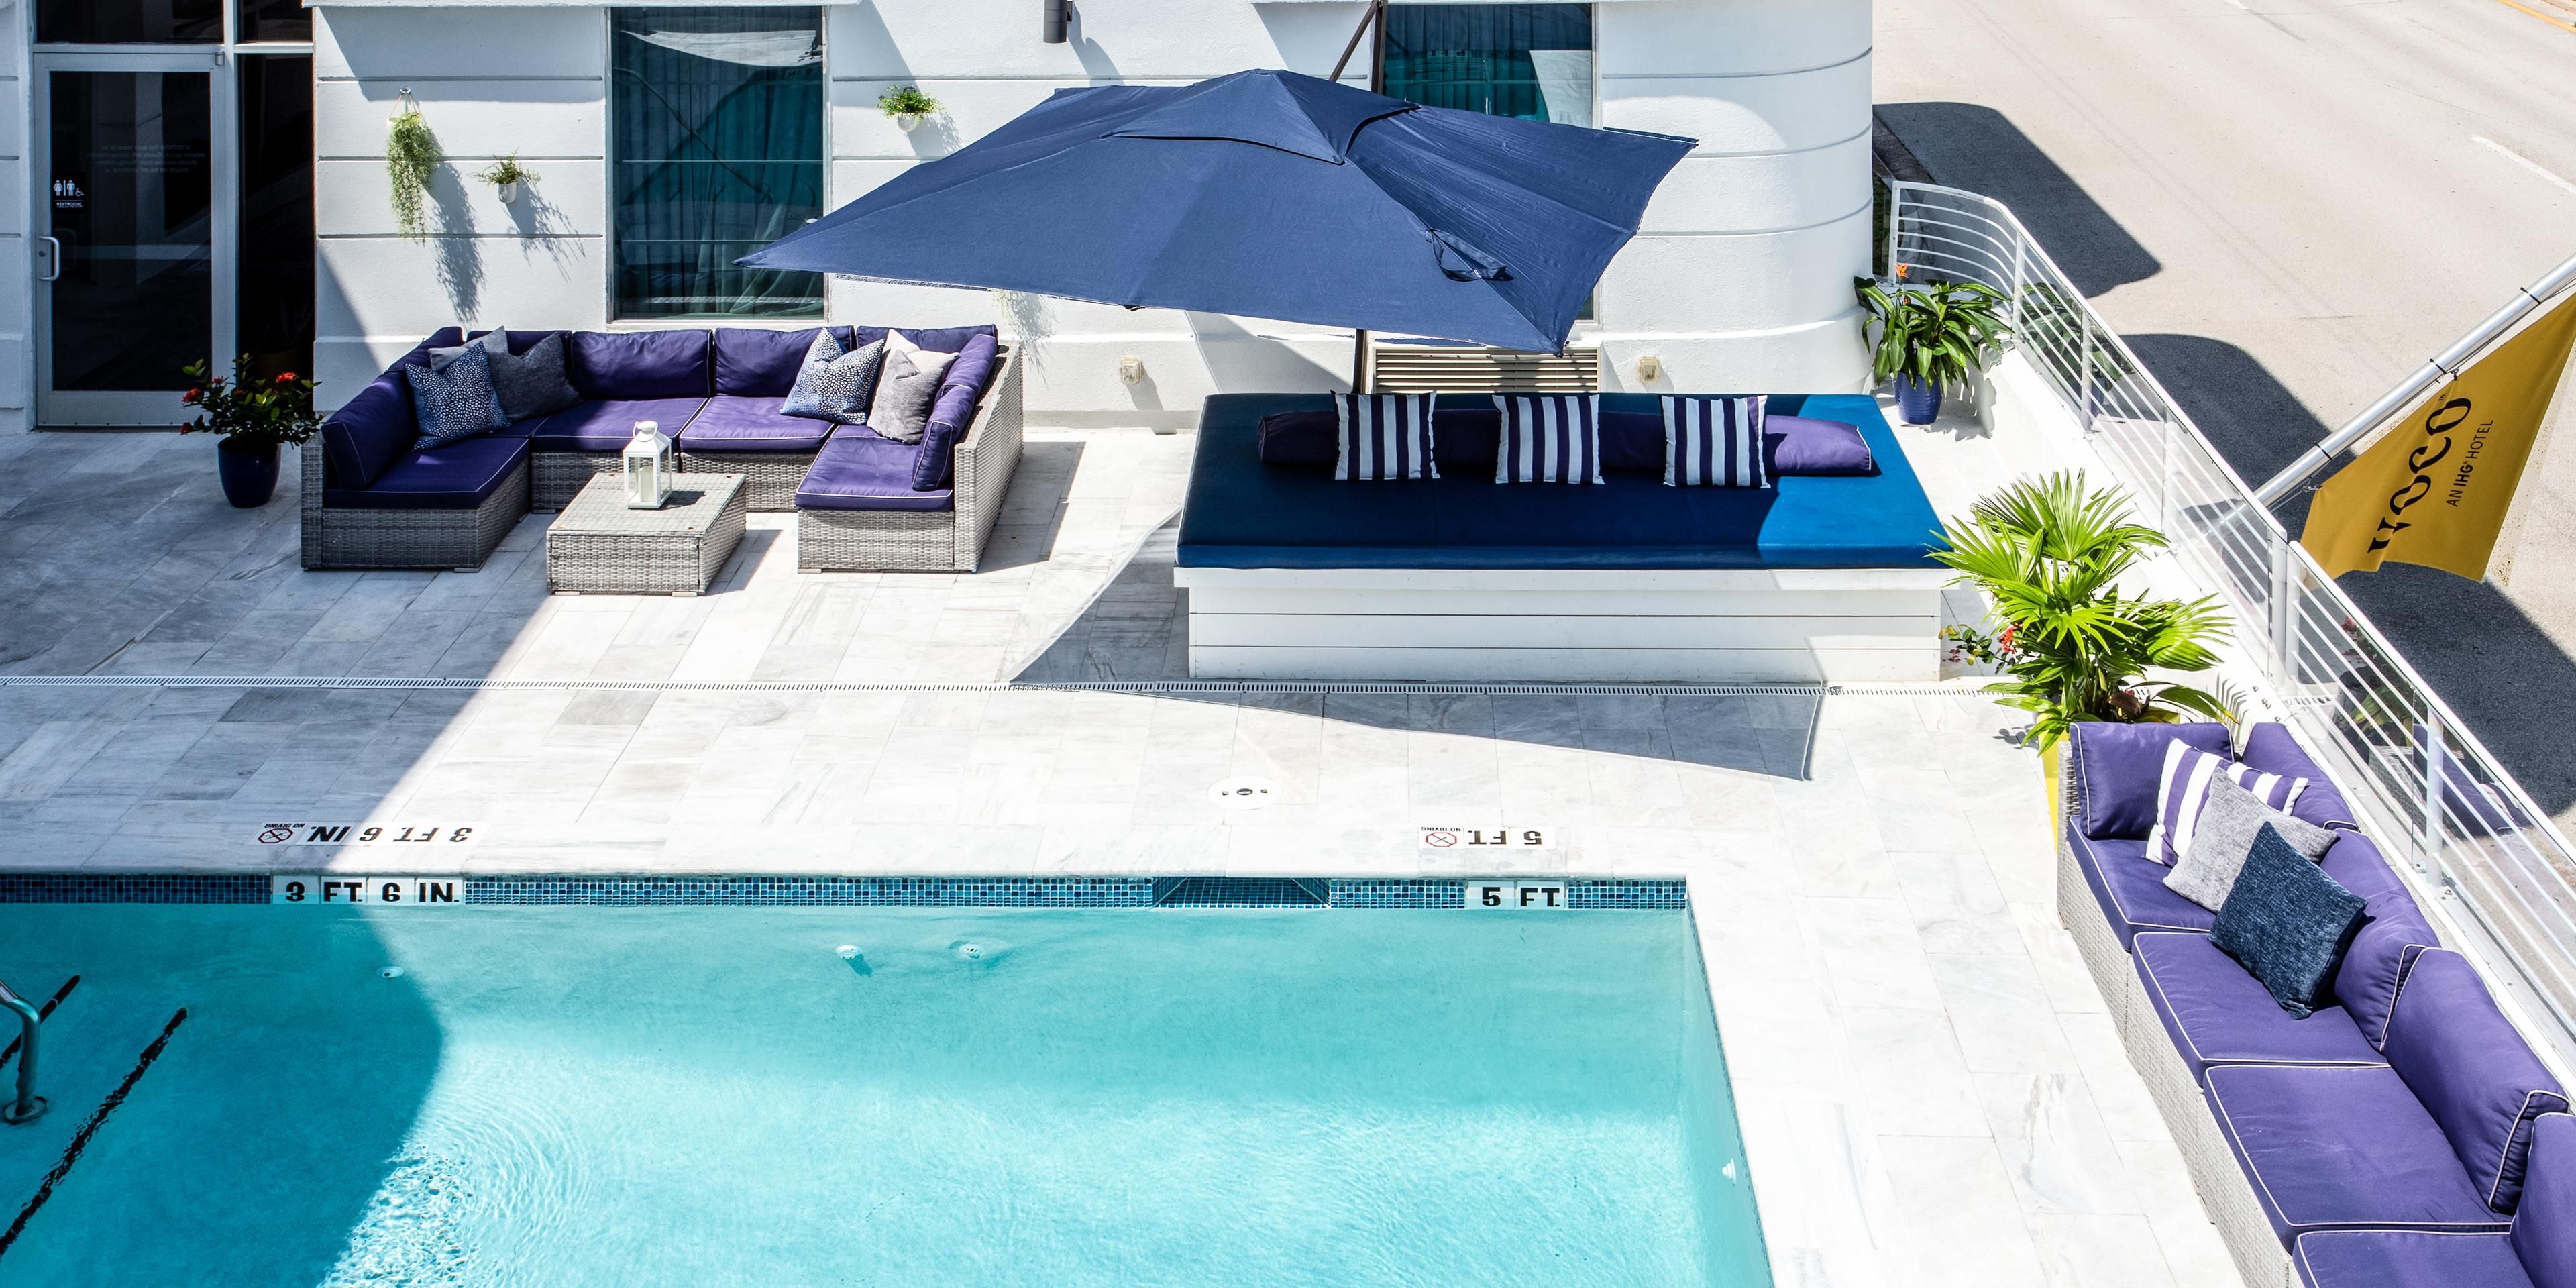 Our pool with sun deck are perfect for relaxing in the Florida sun